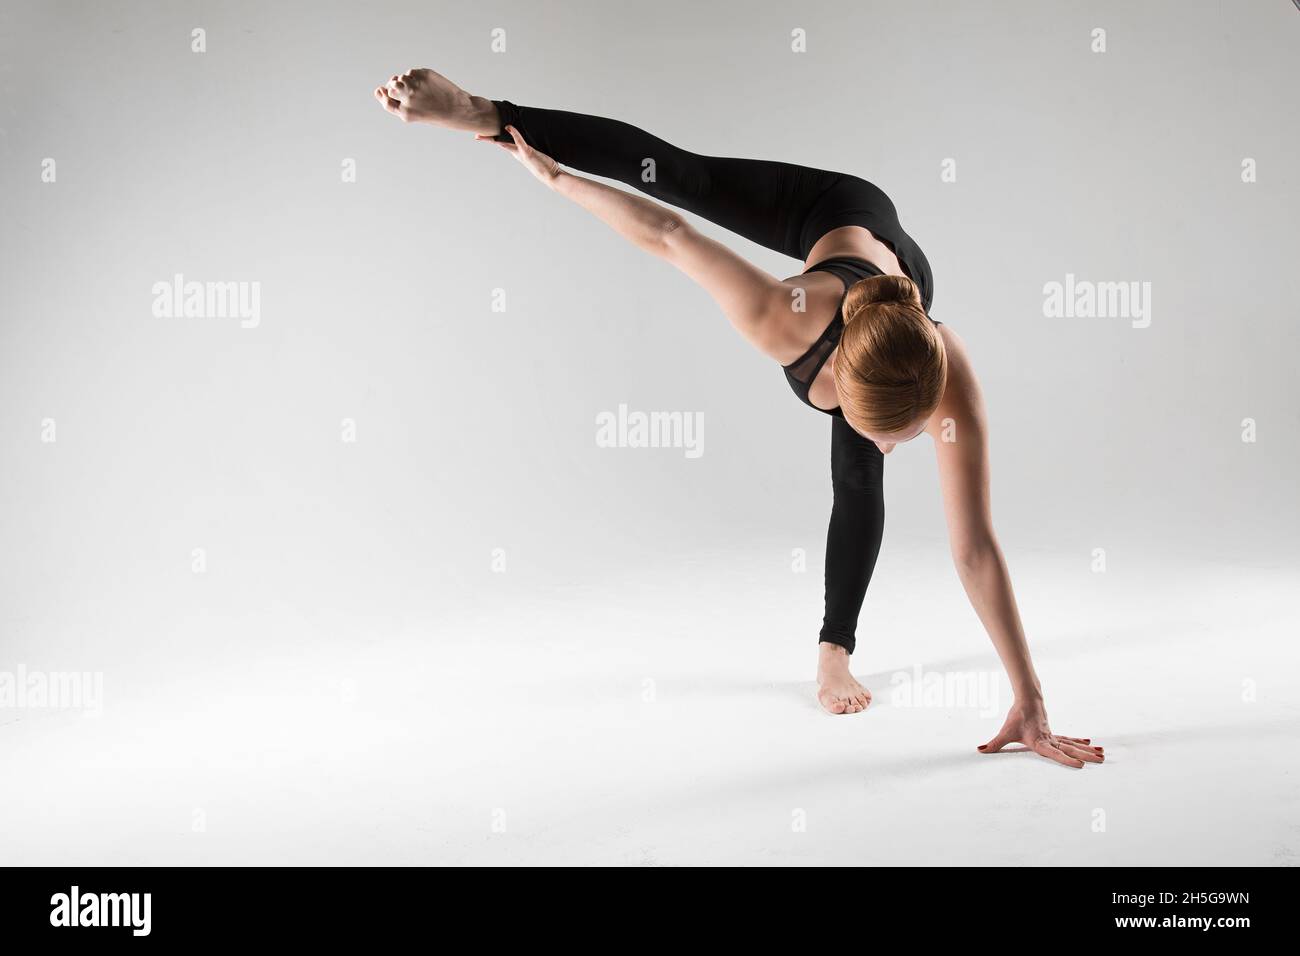 A professional yoga and pilates trainer shows exercises from yoga, pilates, stretching and other types of fitness on a mat with equipment, with fitnes Stock Photo